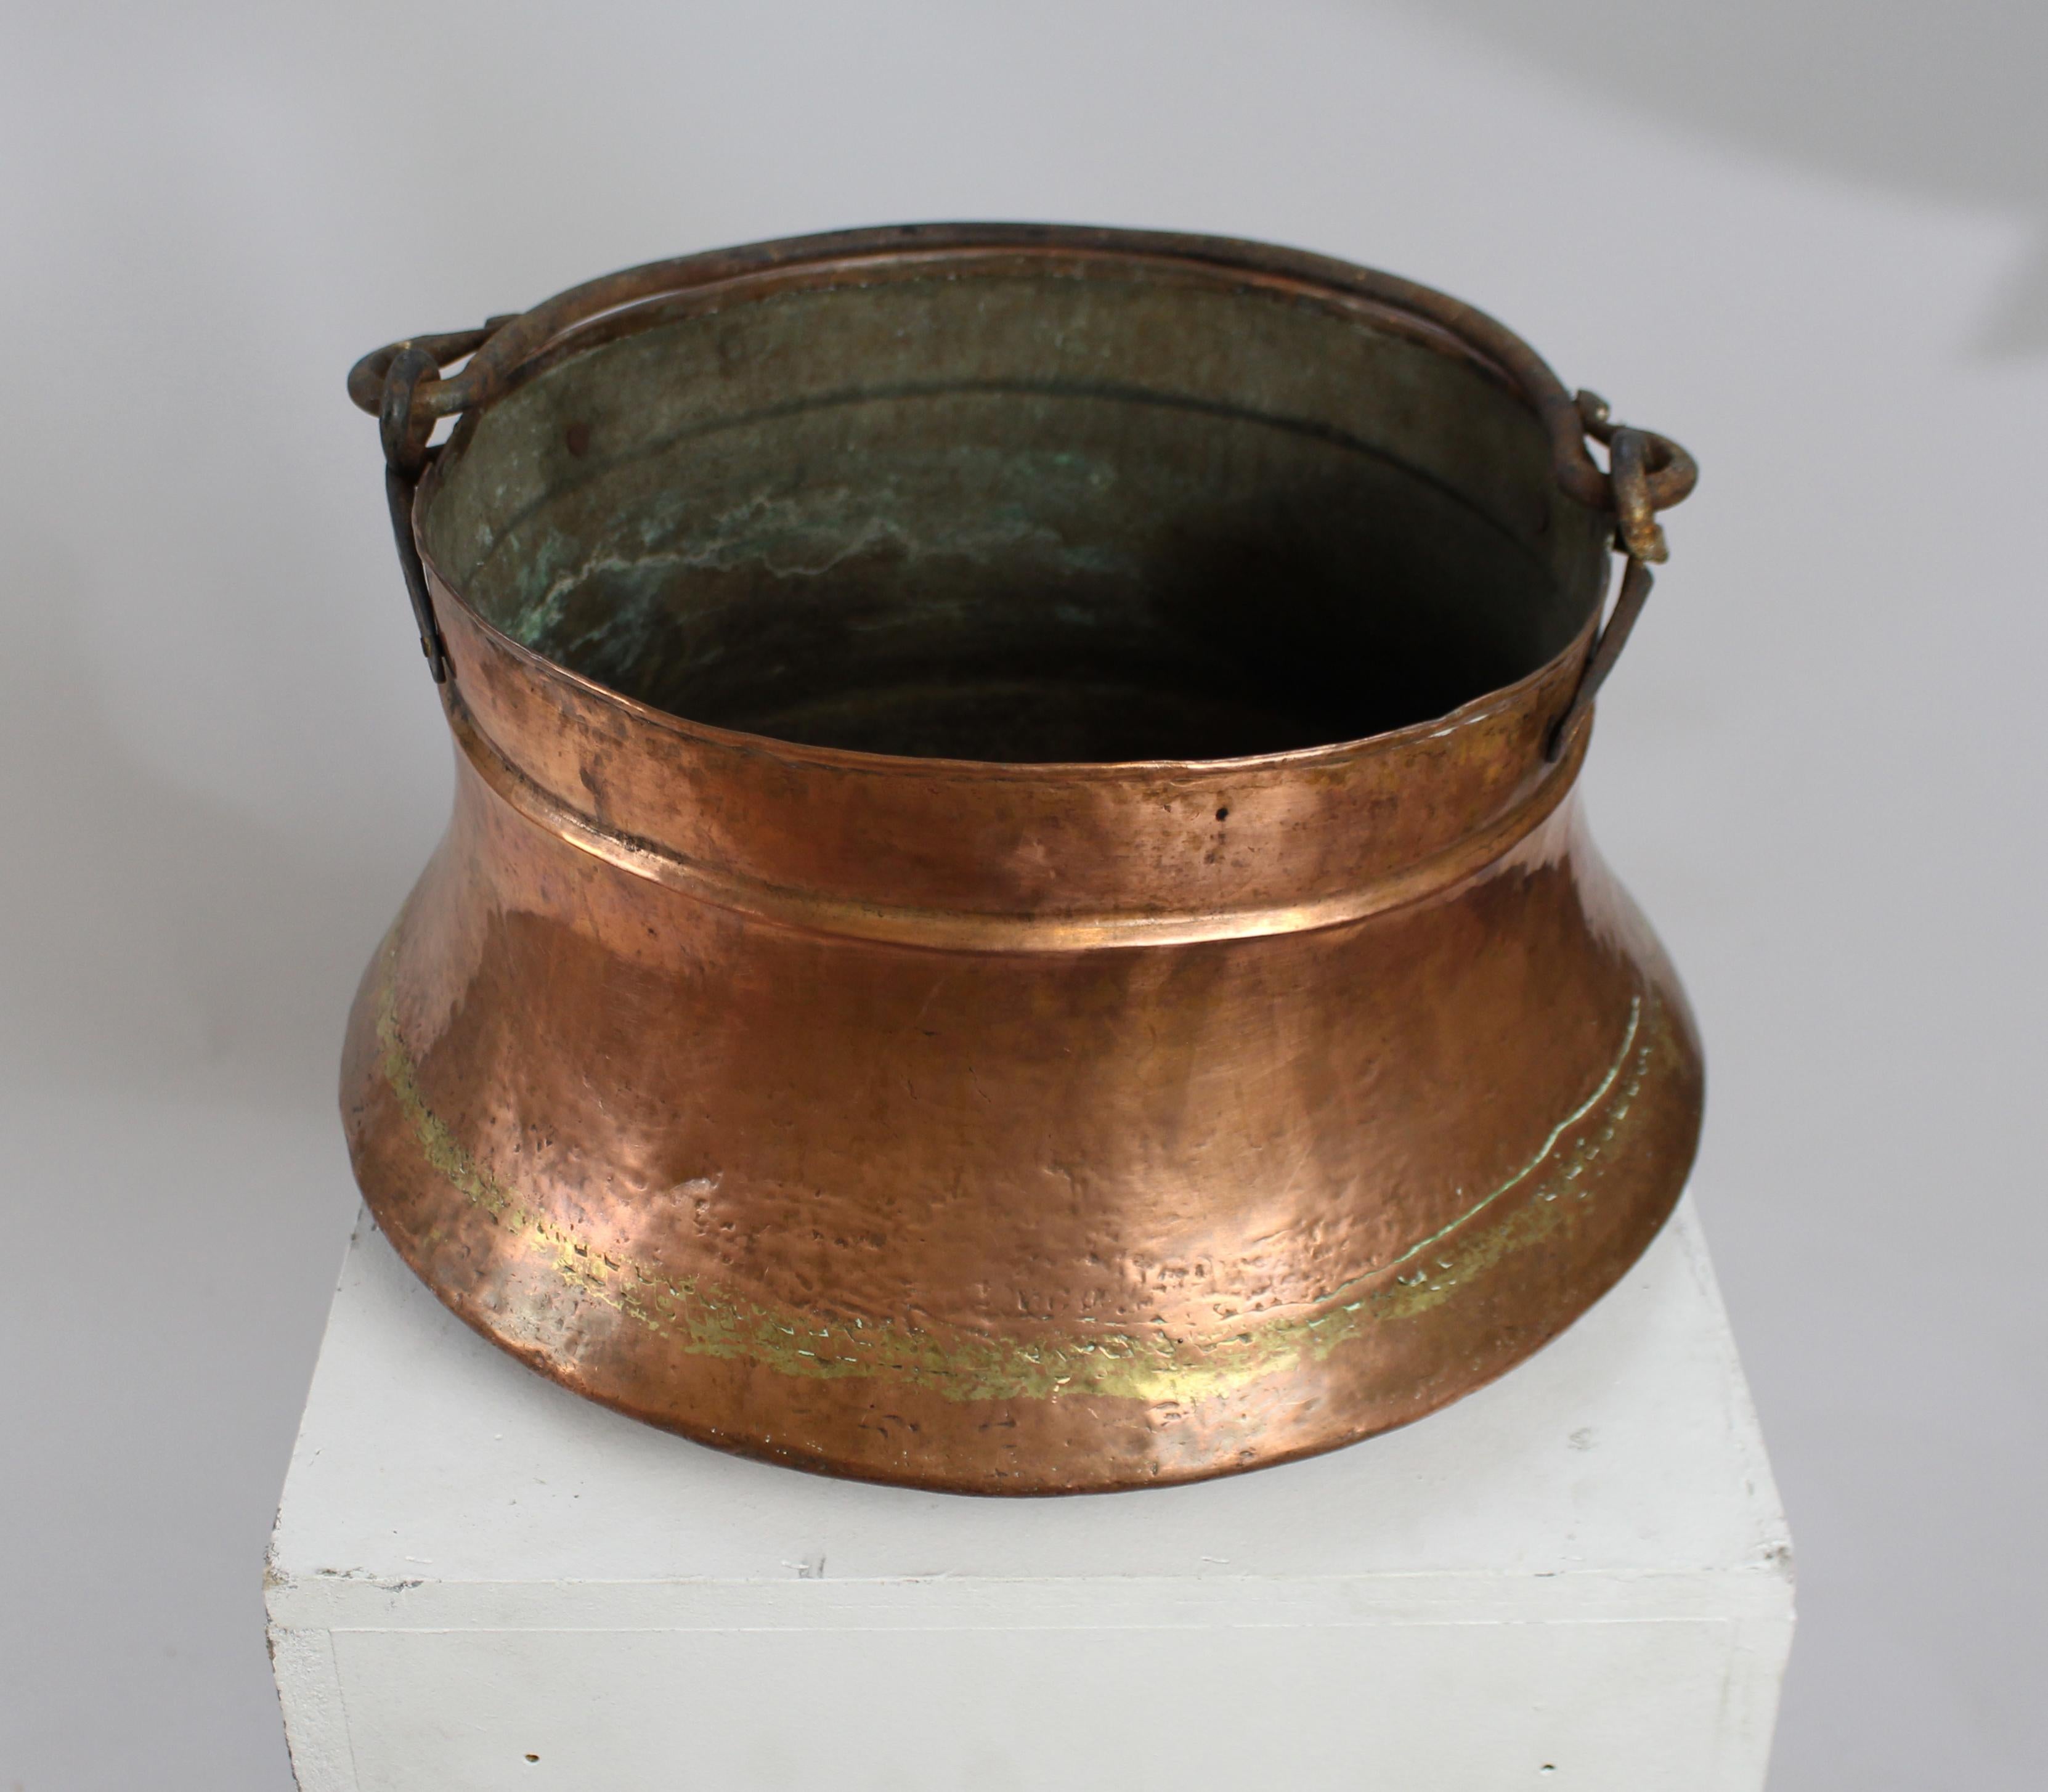 Large early 19th c. copper bowl with handle


Antique. English. 

Early 19th century. 

Very large handled copper pot. 

Hammered finish. 

Width: 40 cm. 

Height (handle down): 23 cm. 

Good original condition.